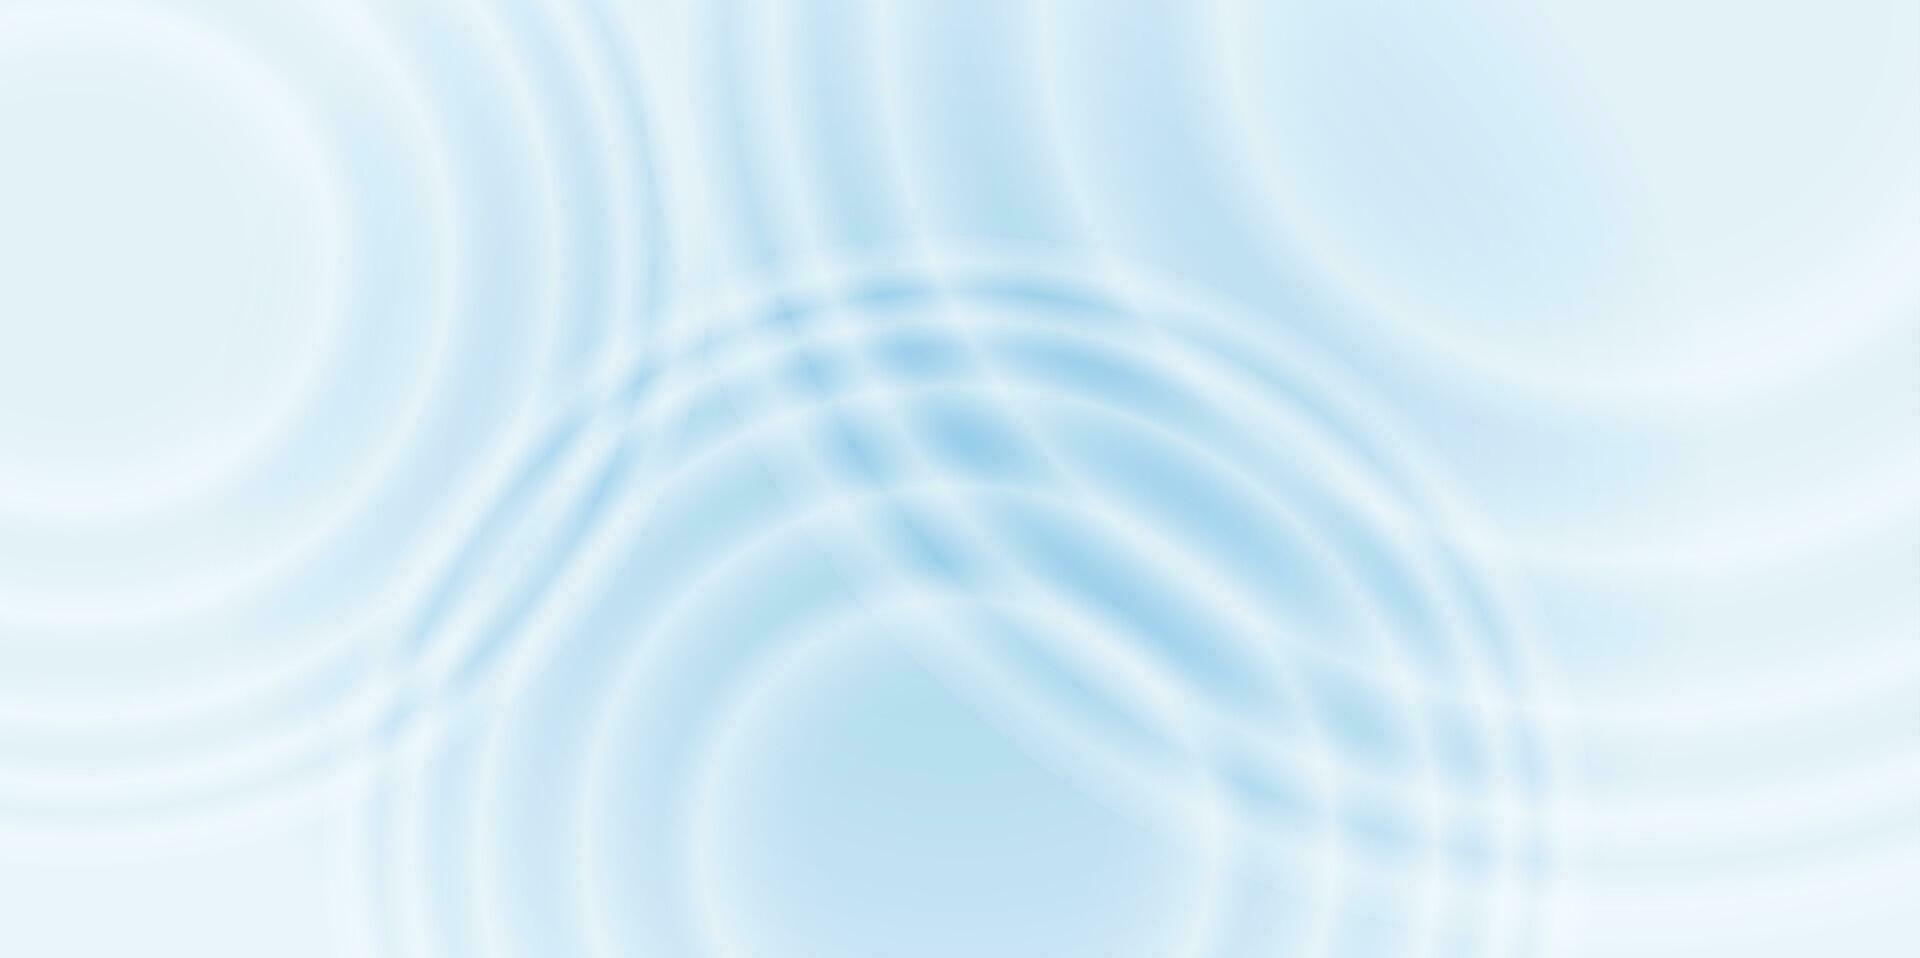 Splash water waves surface from drop isolated on transparent for cosmetic moisturizer background. vector circle ripple water. vector design.